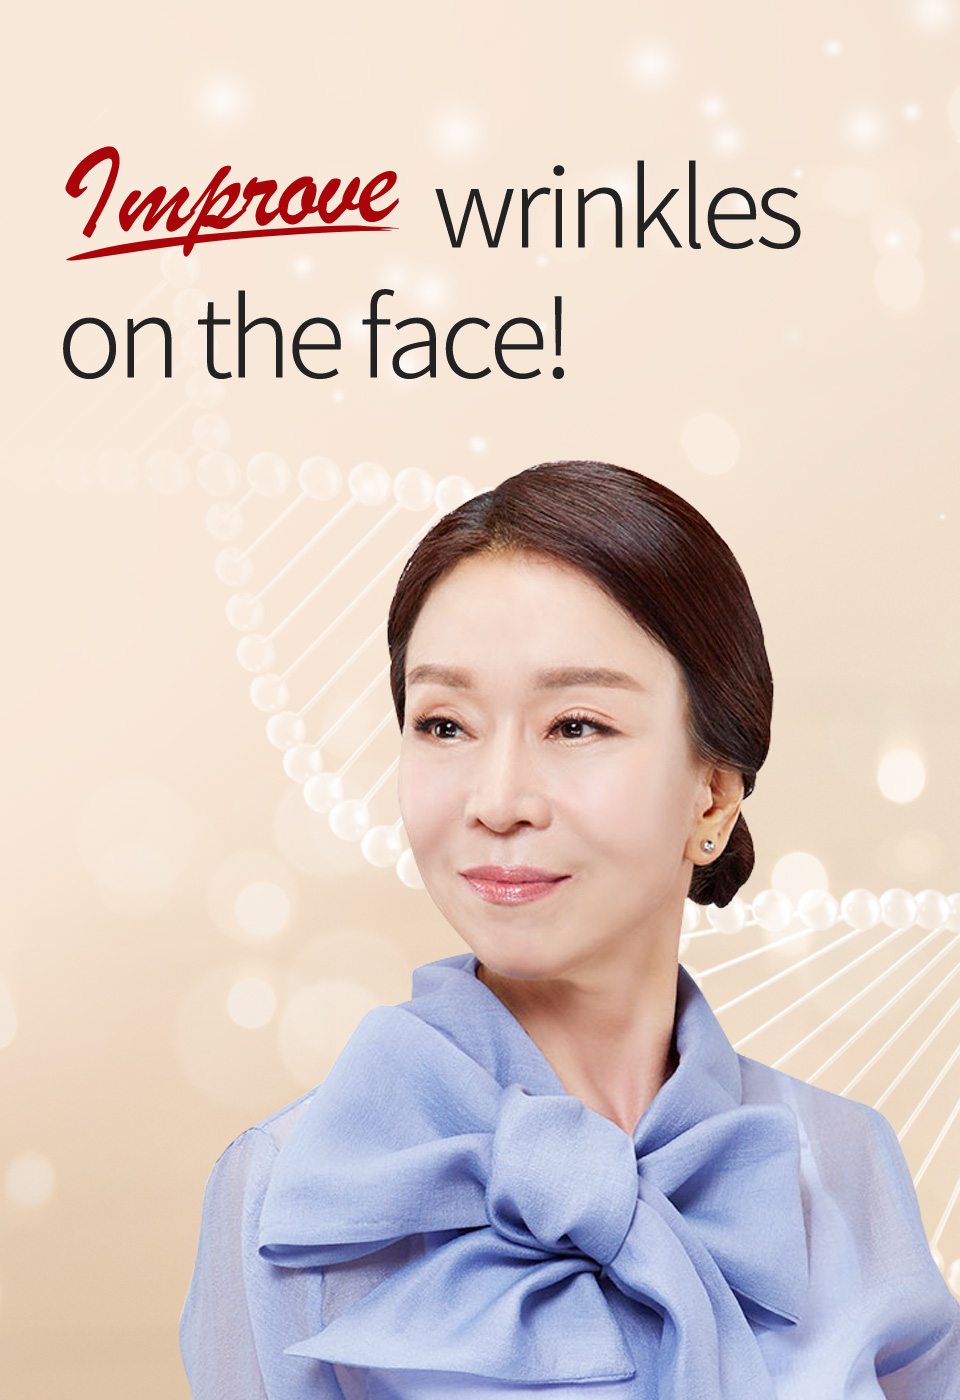 Improve wrinkles on the face!